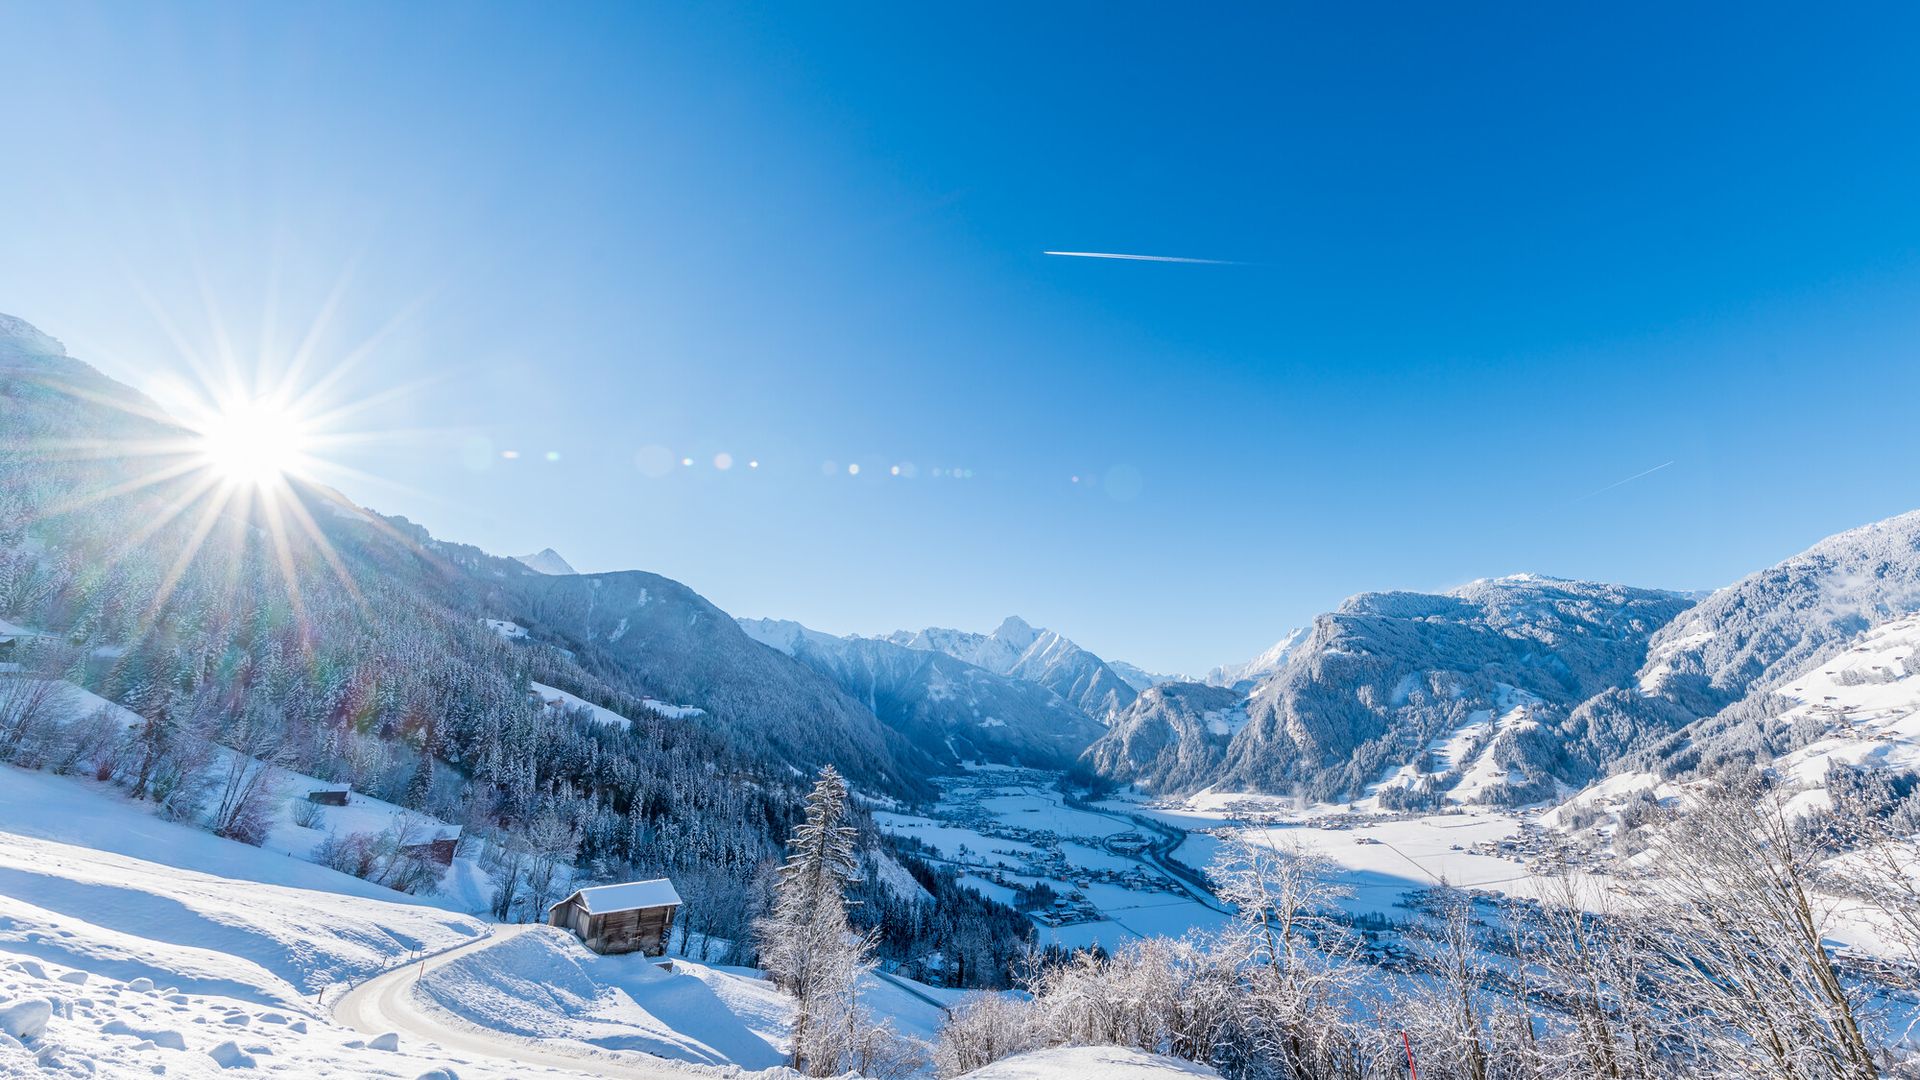 Enjoy the deep snow-covered winter landscape in the Ziller Valley